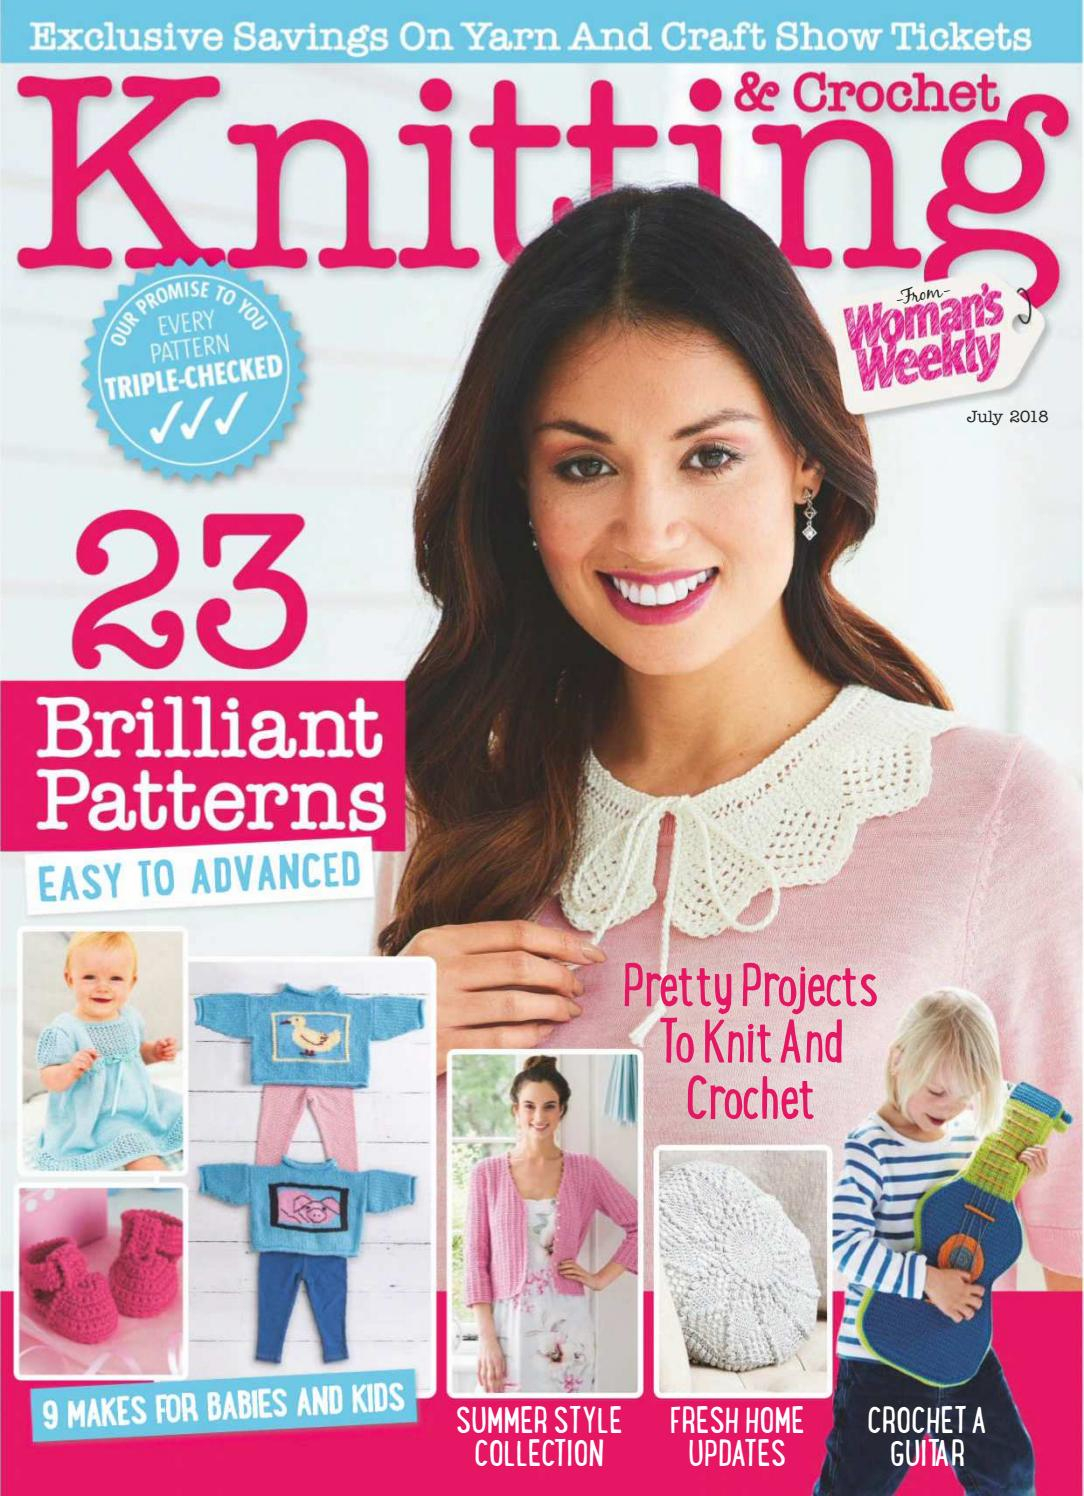 Woman Weekly Knitting Patterns 2018 07 01 Knitting Crochet From Womans Weekly Minh Thu Issuu